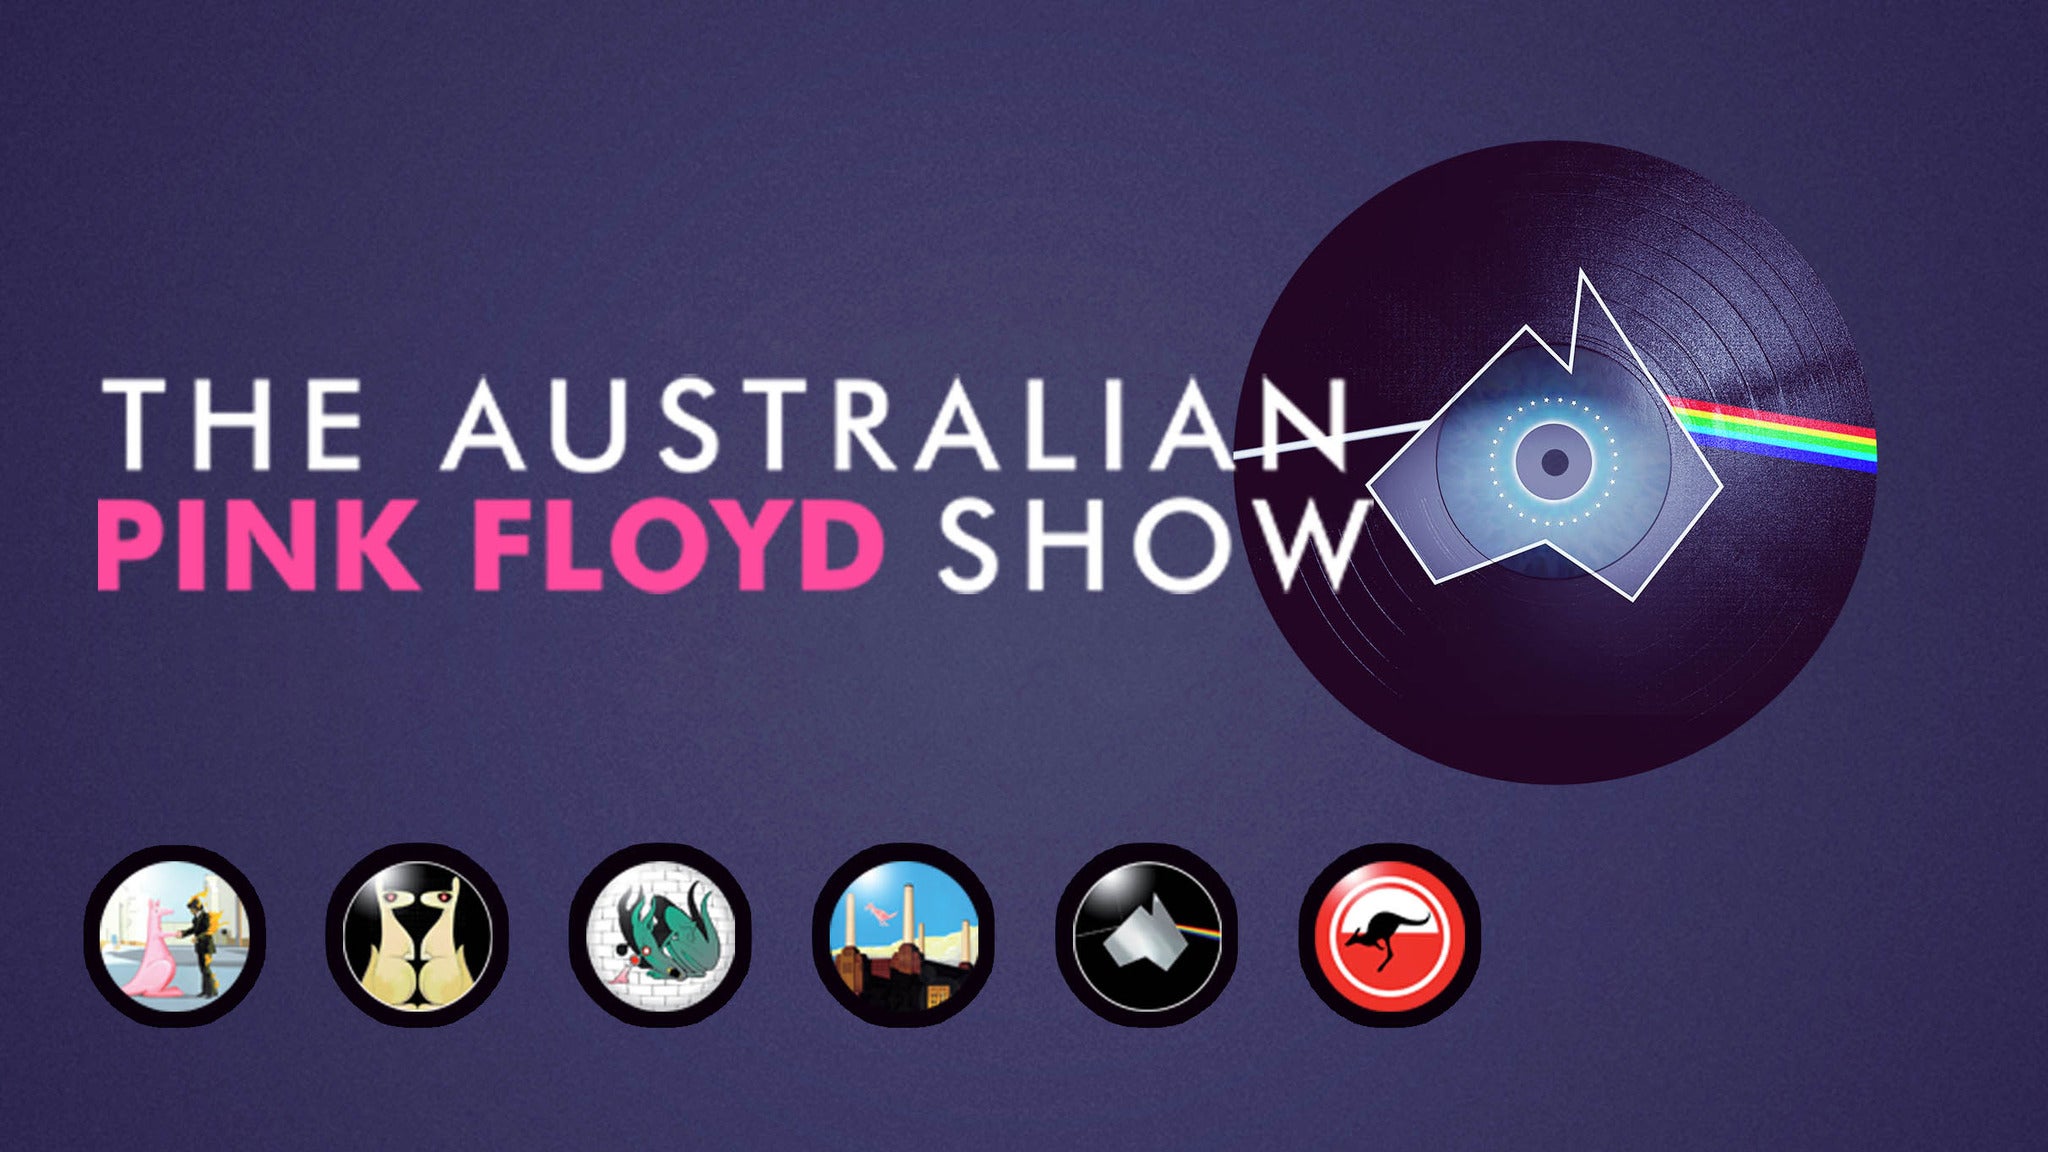 exclusive presale password for The Australian Pink Floyd Show advanced tickets in New Buffalo